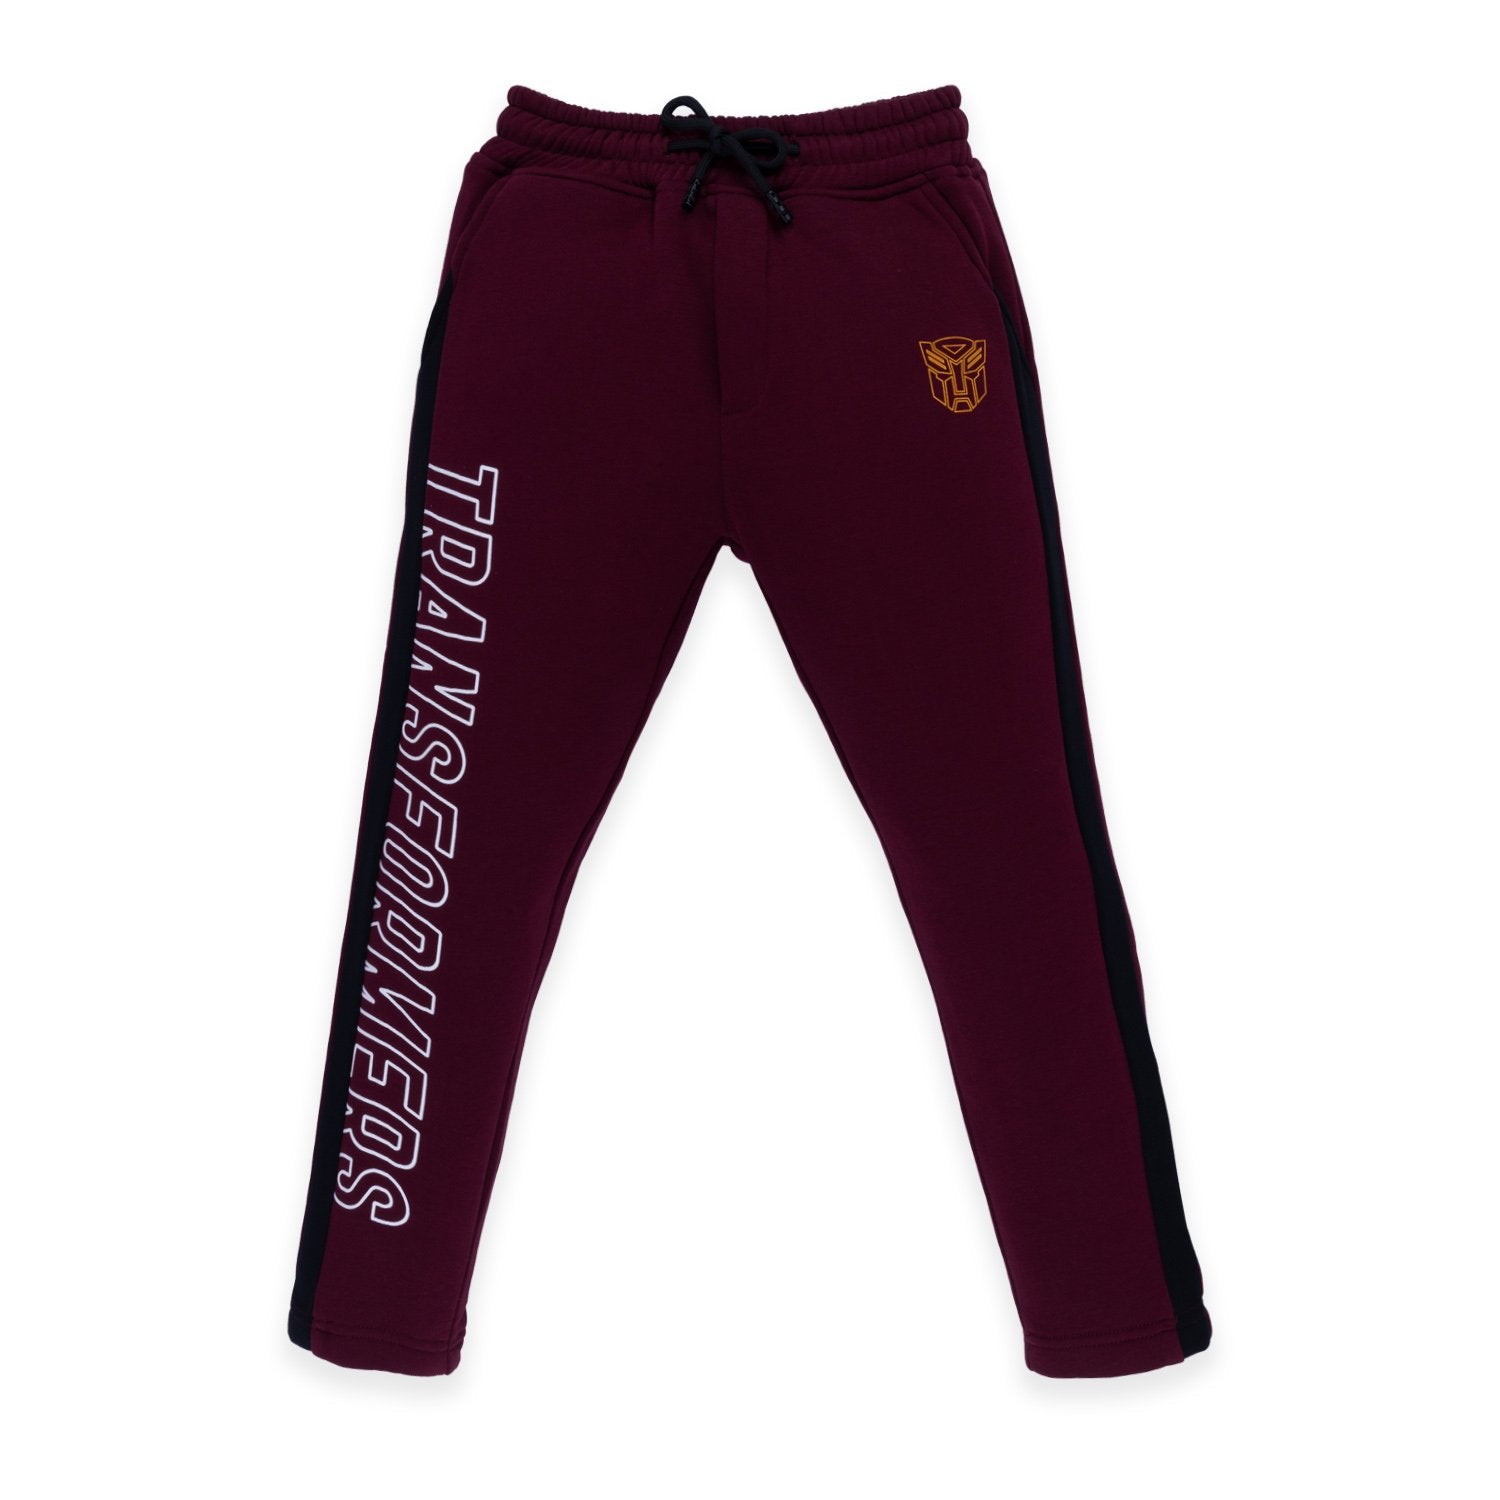 joggers for kids